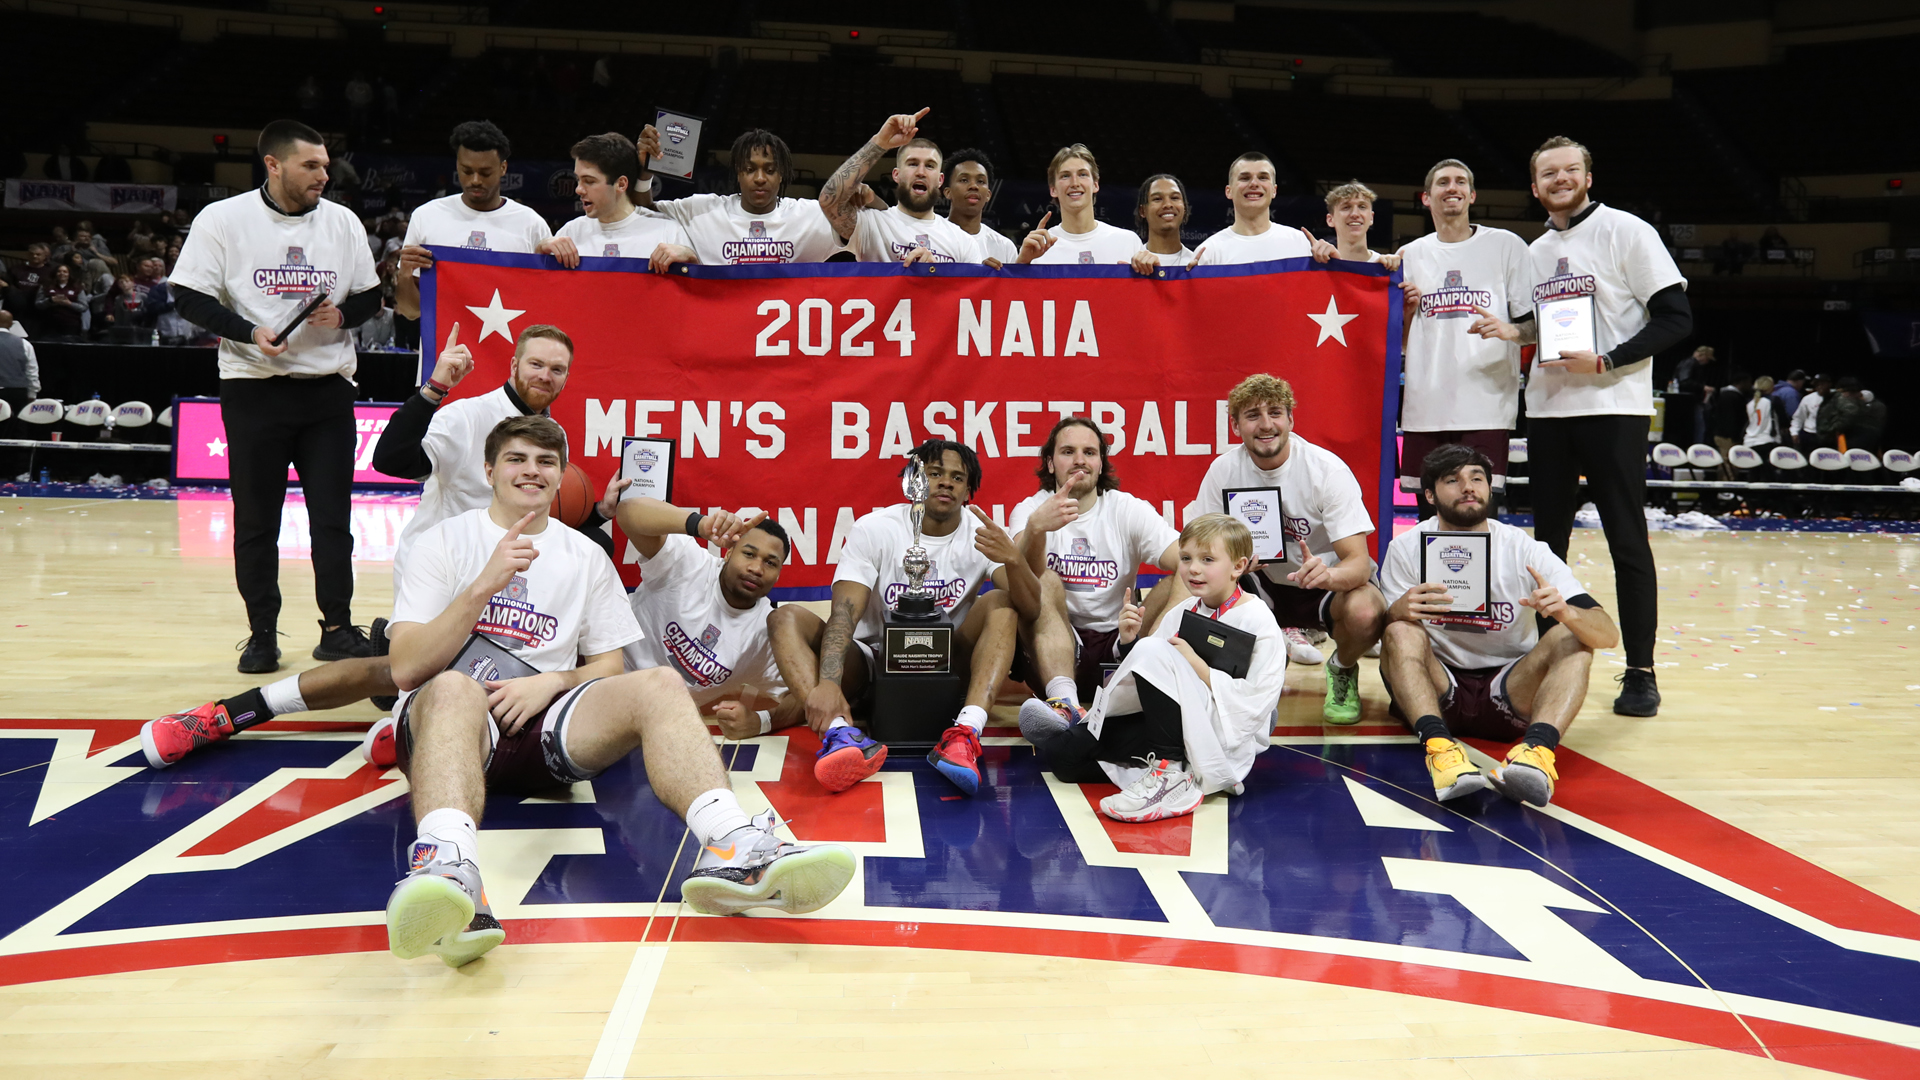 Freed-Hardeman (Tenn.) captured its first NAIA Men's Basketball Red Banner on Tuesday (Courtesy: MSH Visual)